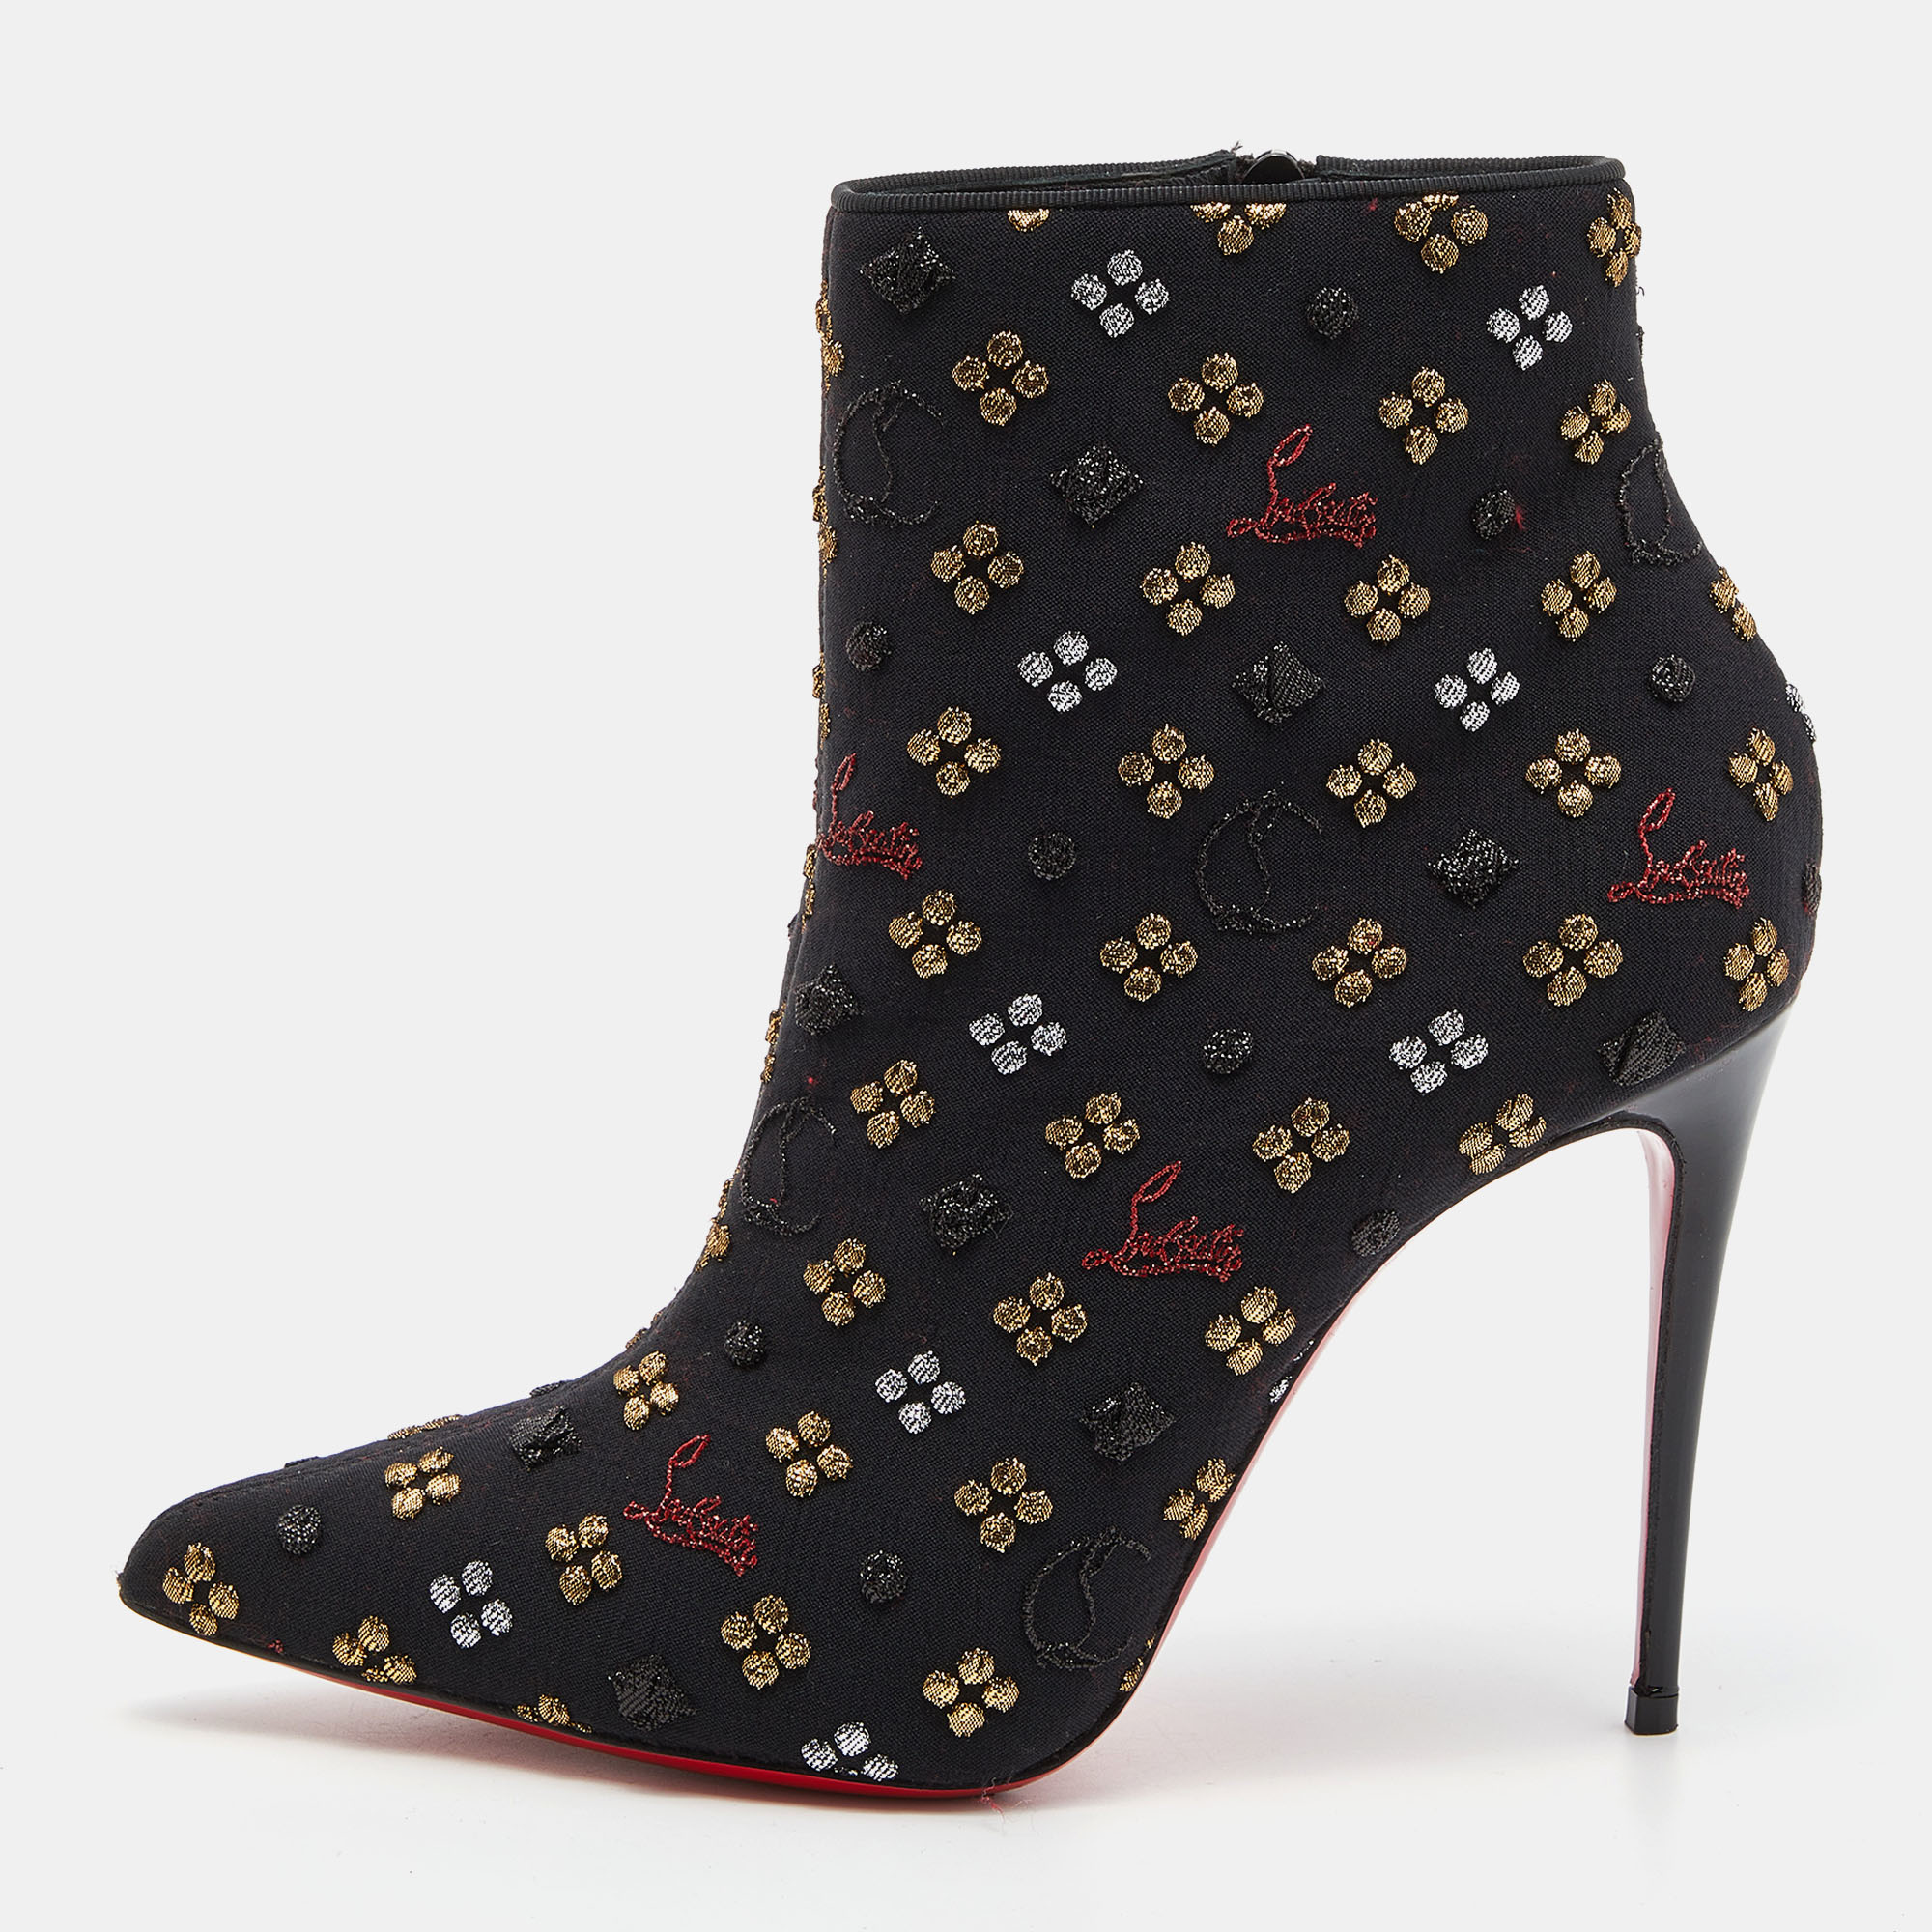 Pre-owned Christian Louboutin Black Embroidered Fabric So Kate Ankle Booties Size 37.5